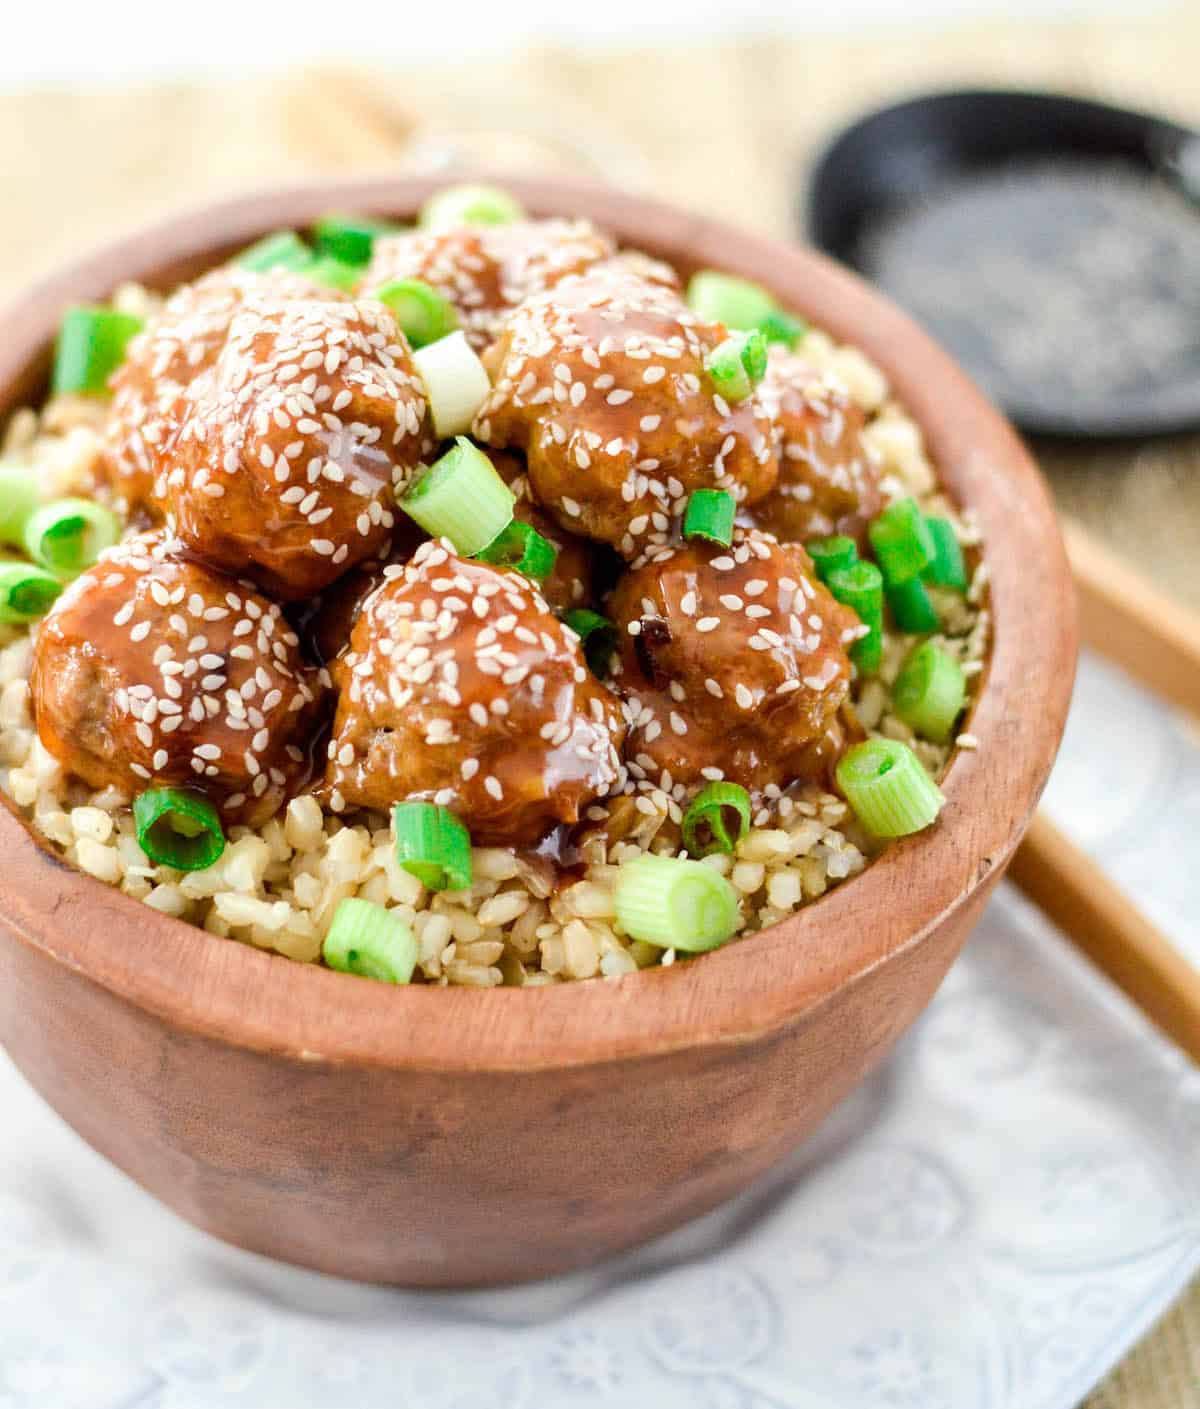 Paleo Sweet and Sour Meatballs in a bowl with brown rice, green onions and sesame seeds